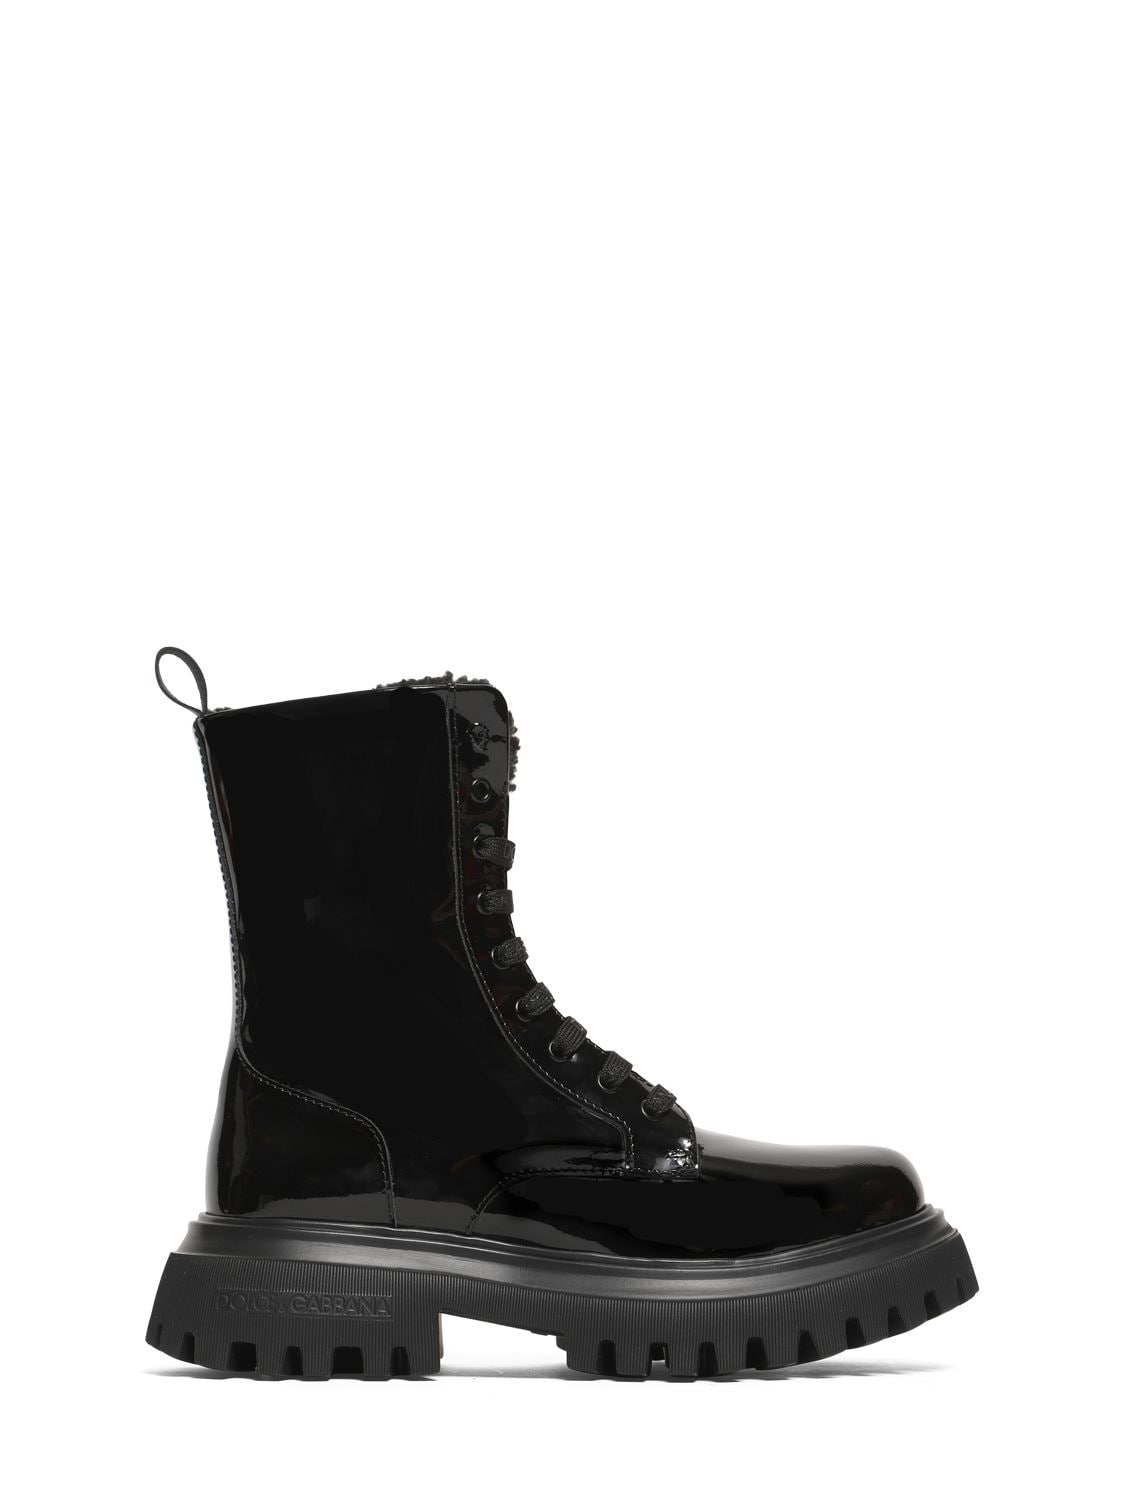 Dolce & Gabbana Kids' Patent Leather Boots W/ Logo In Black